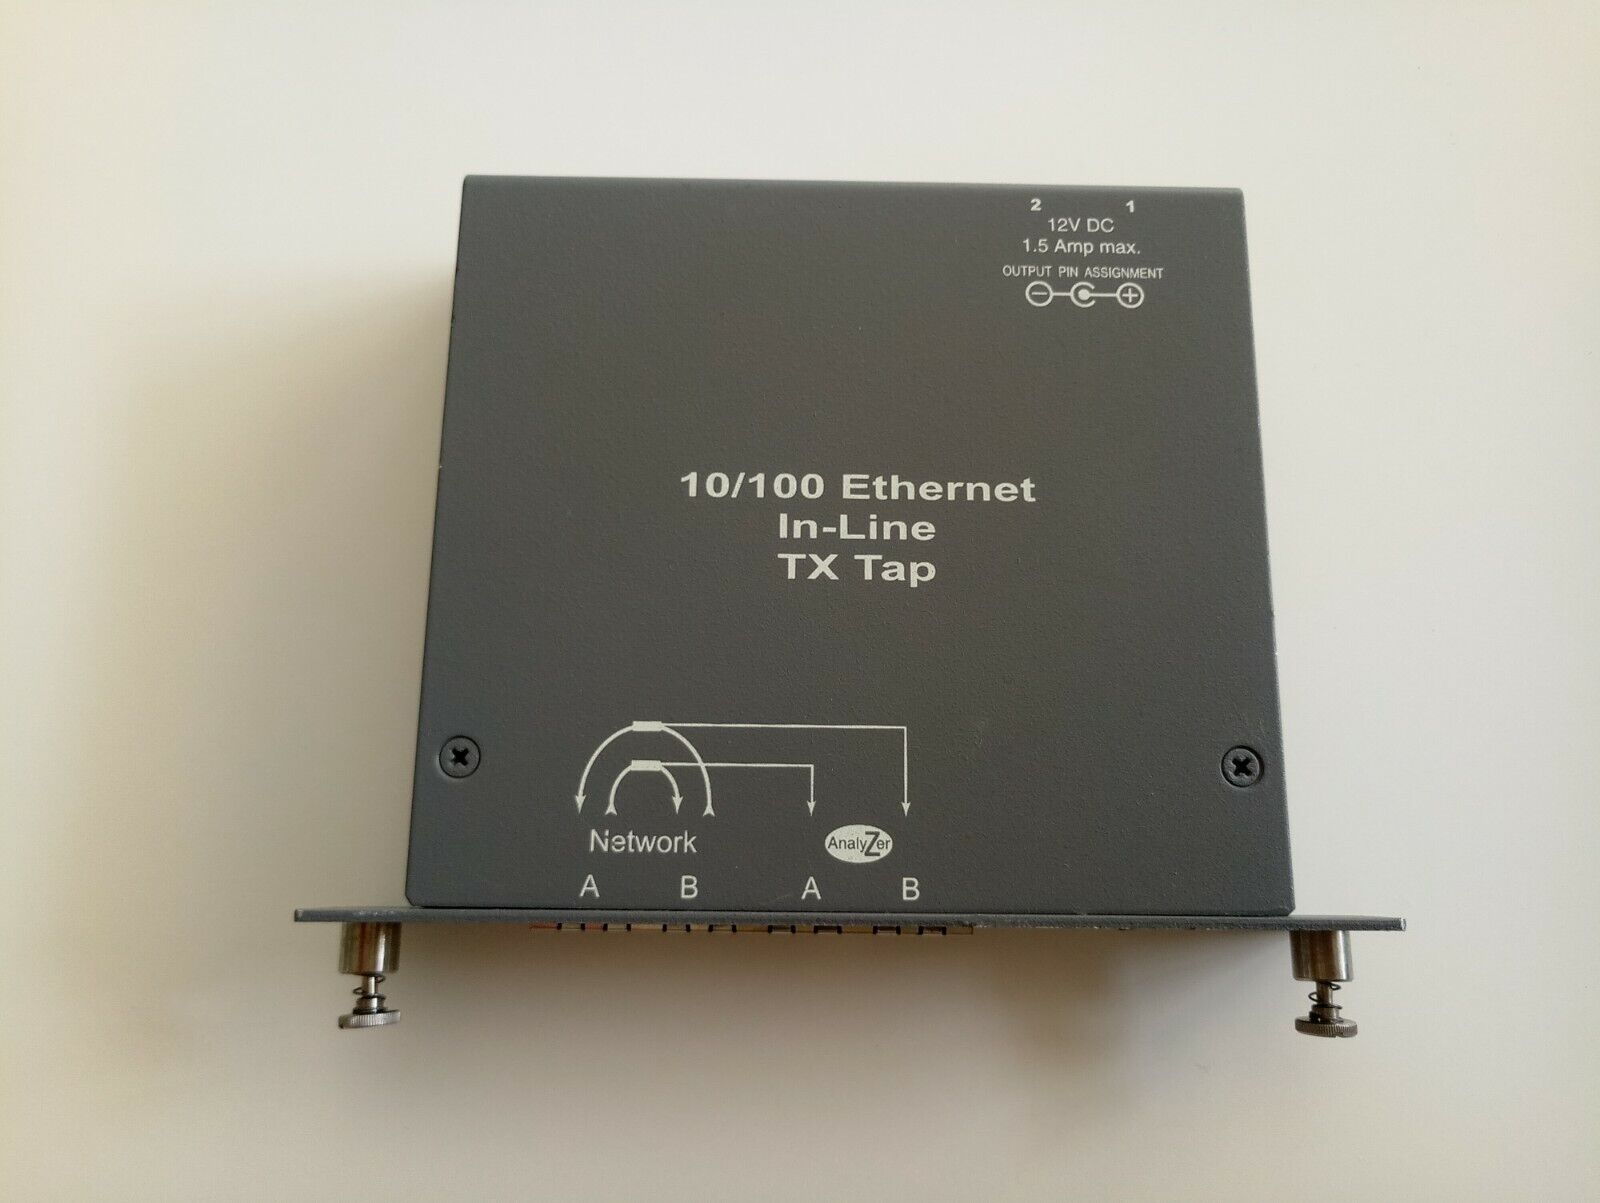 SOURCE fire 10/100 Ethernet In-Line TX tap